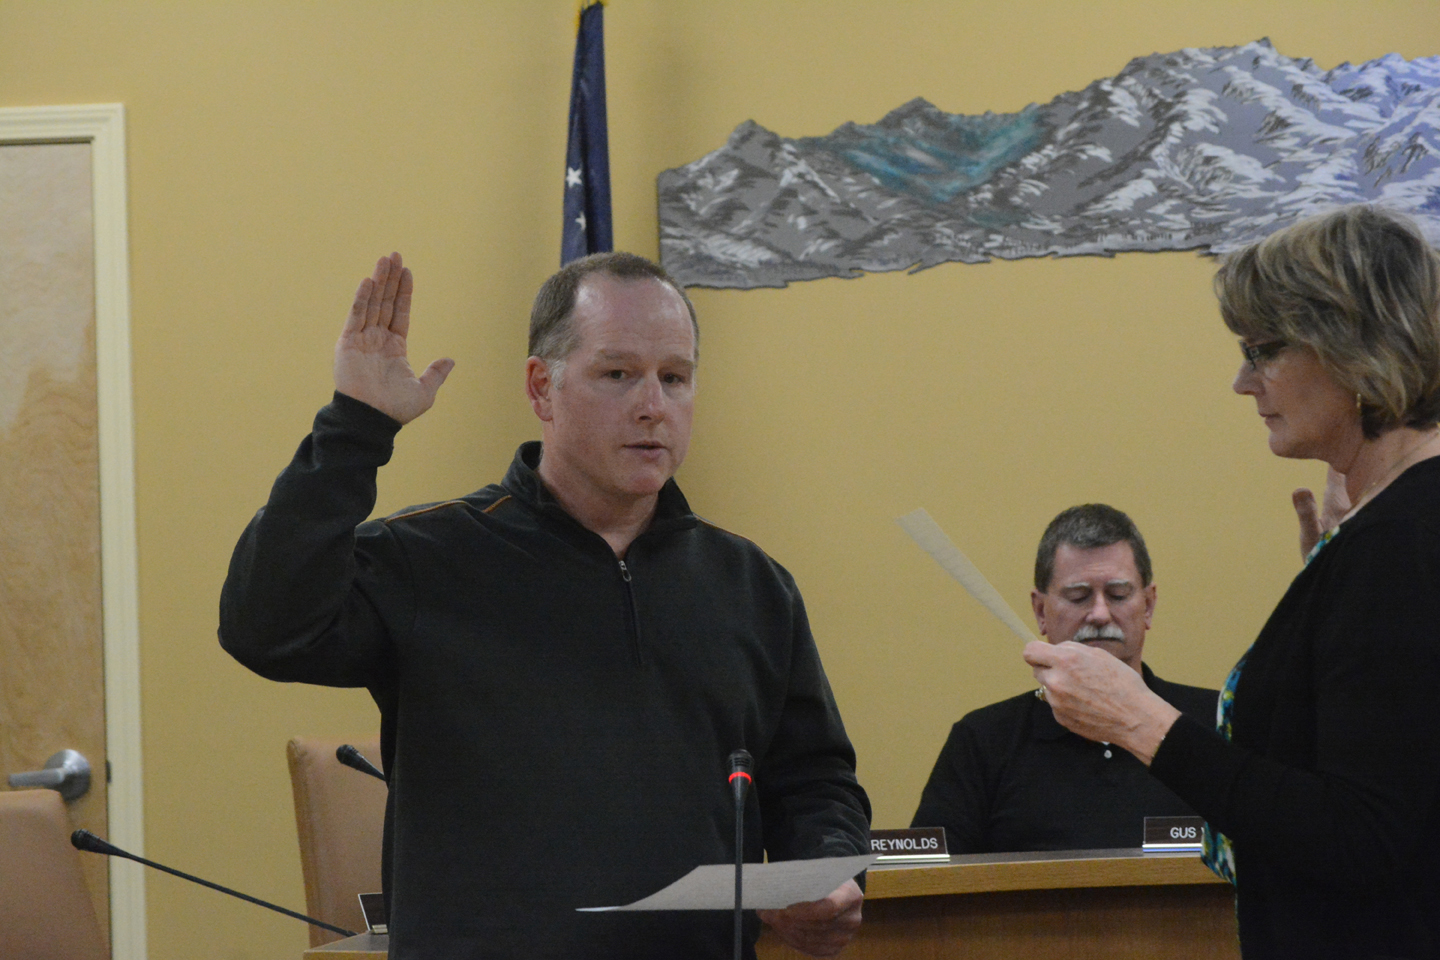 Homer City Council member Heath Smith takes the oath of office at a special meeting on Monday. Smith was elected in a run-off election on Nov. 3 when he defeated incumbent council member Beauregard Burgess. In final election results, Smith won with 401 votes, or 64 percent, to 227, or 36 percent, for Burgess. With 633 out of 4,520 registered voters, the election turnout was 14 percent. The council also selected council member David Lewis to be Mayor Pro-Tempore.-photo by Michael Armstrong, Homer News